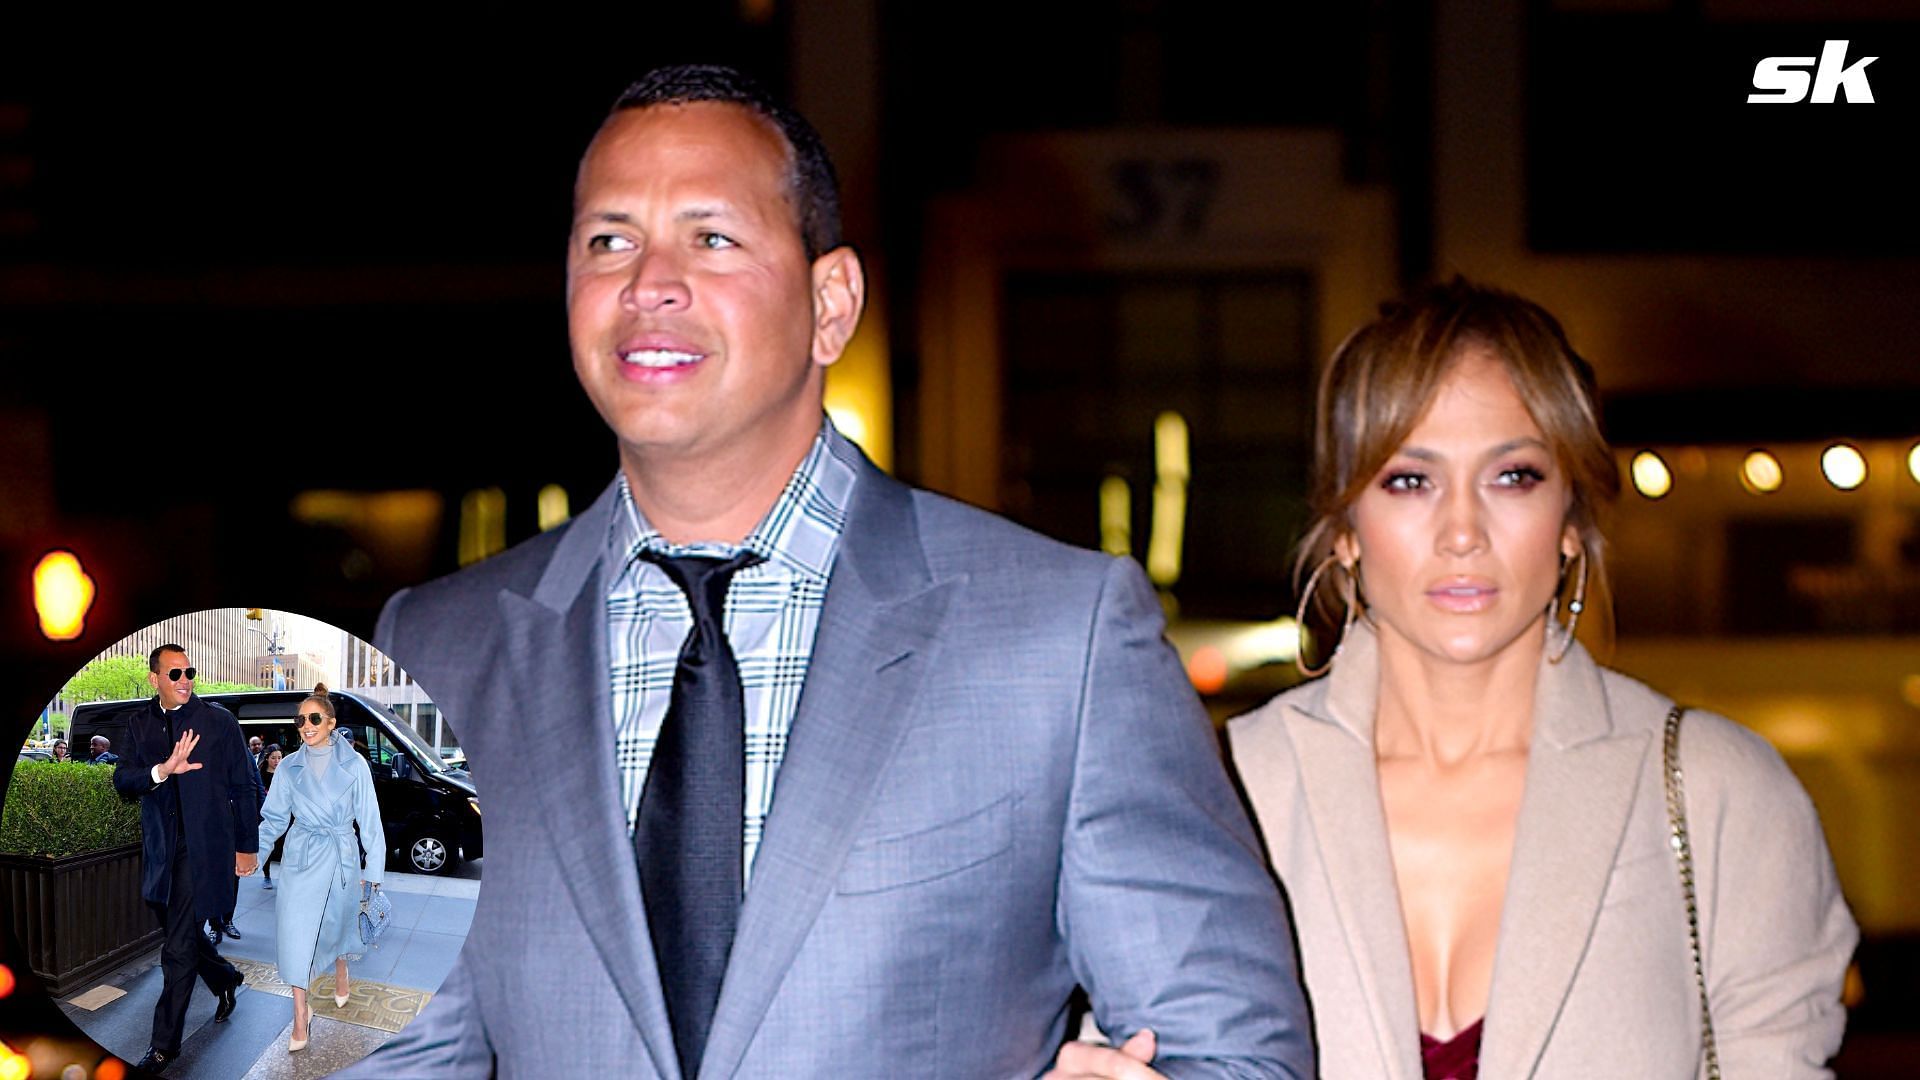 New York Yankees star, Alex Rodriguez walks hand in hand with his ex-fiance Jennifer Lopez during the course of their relationship.